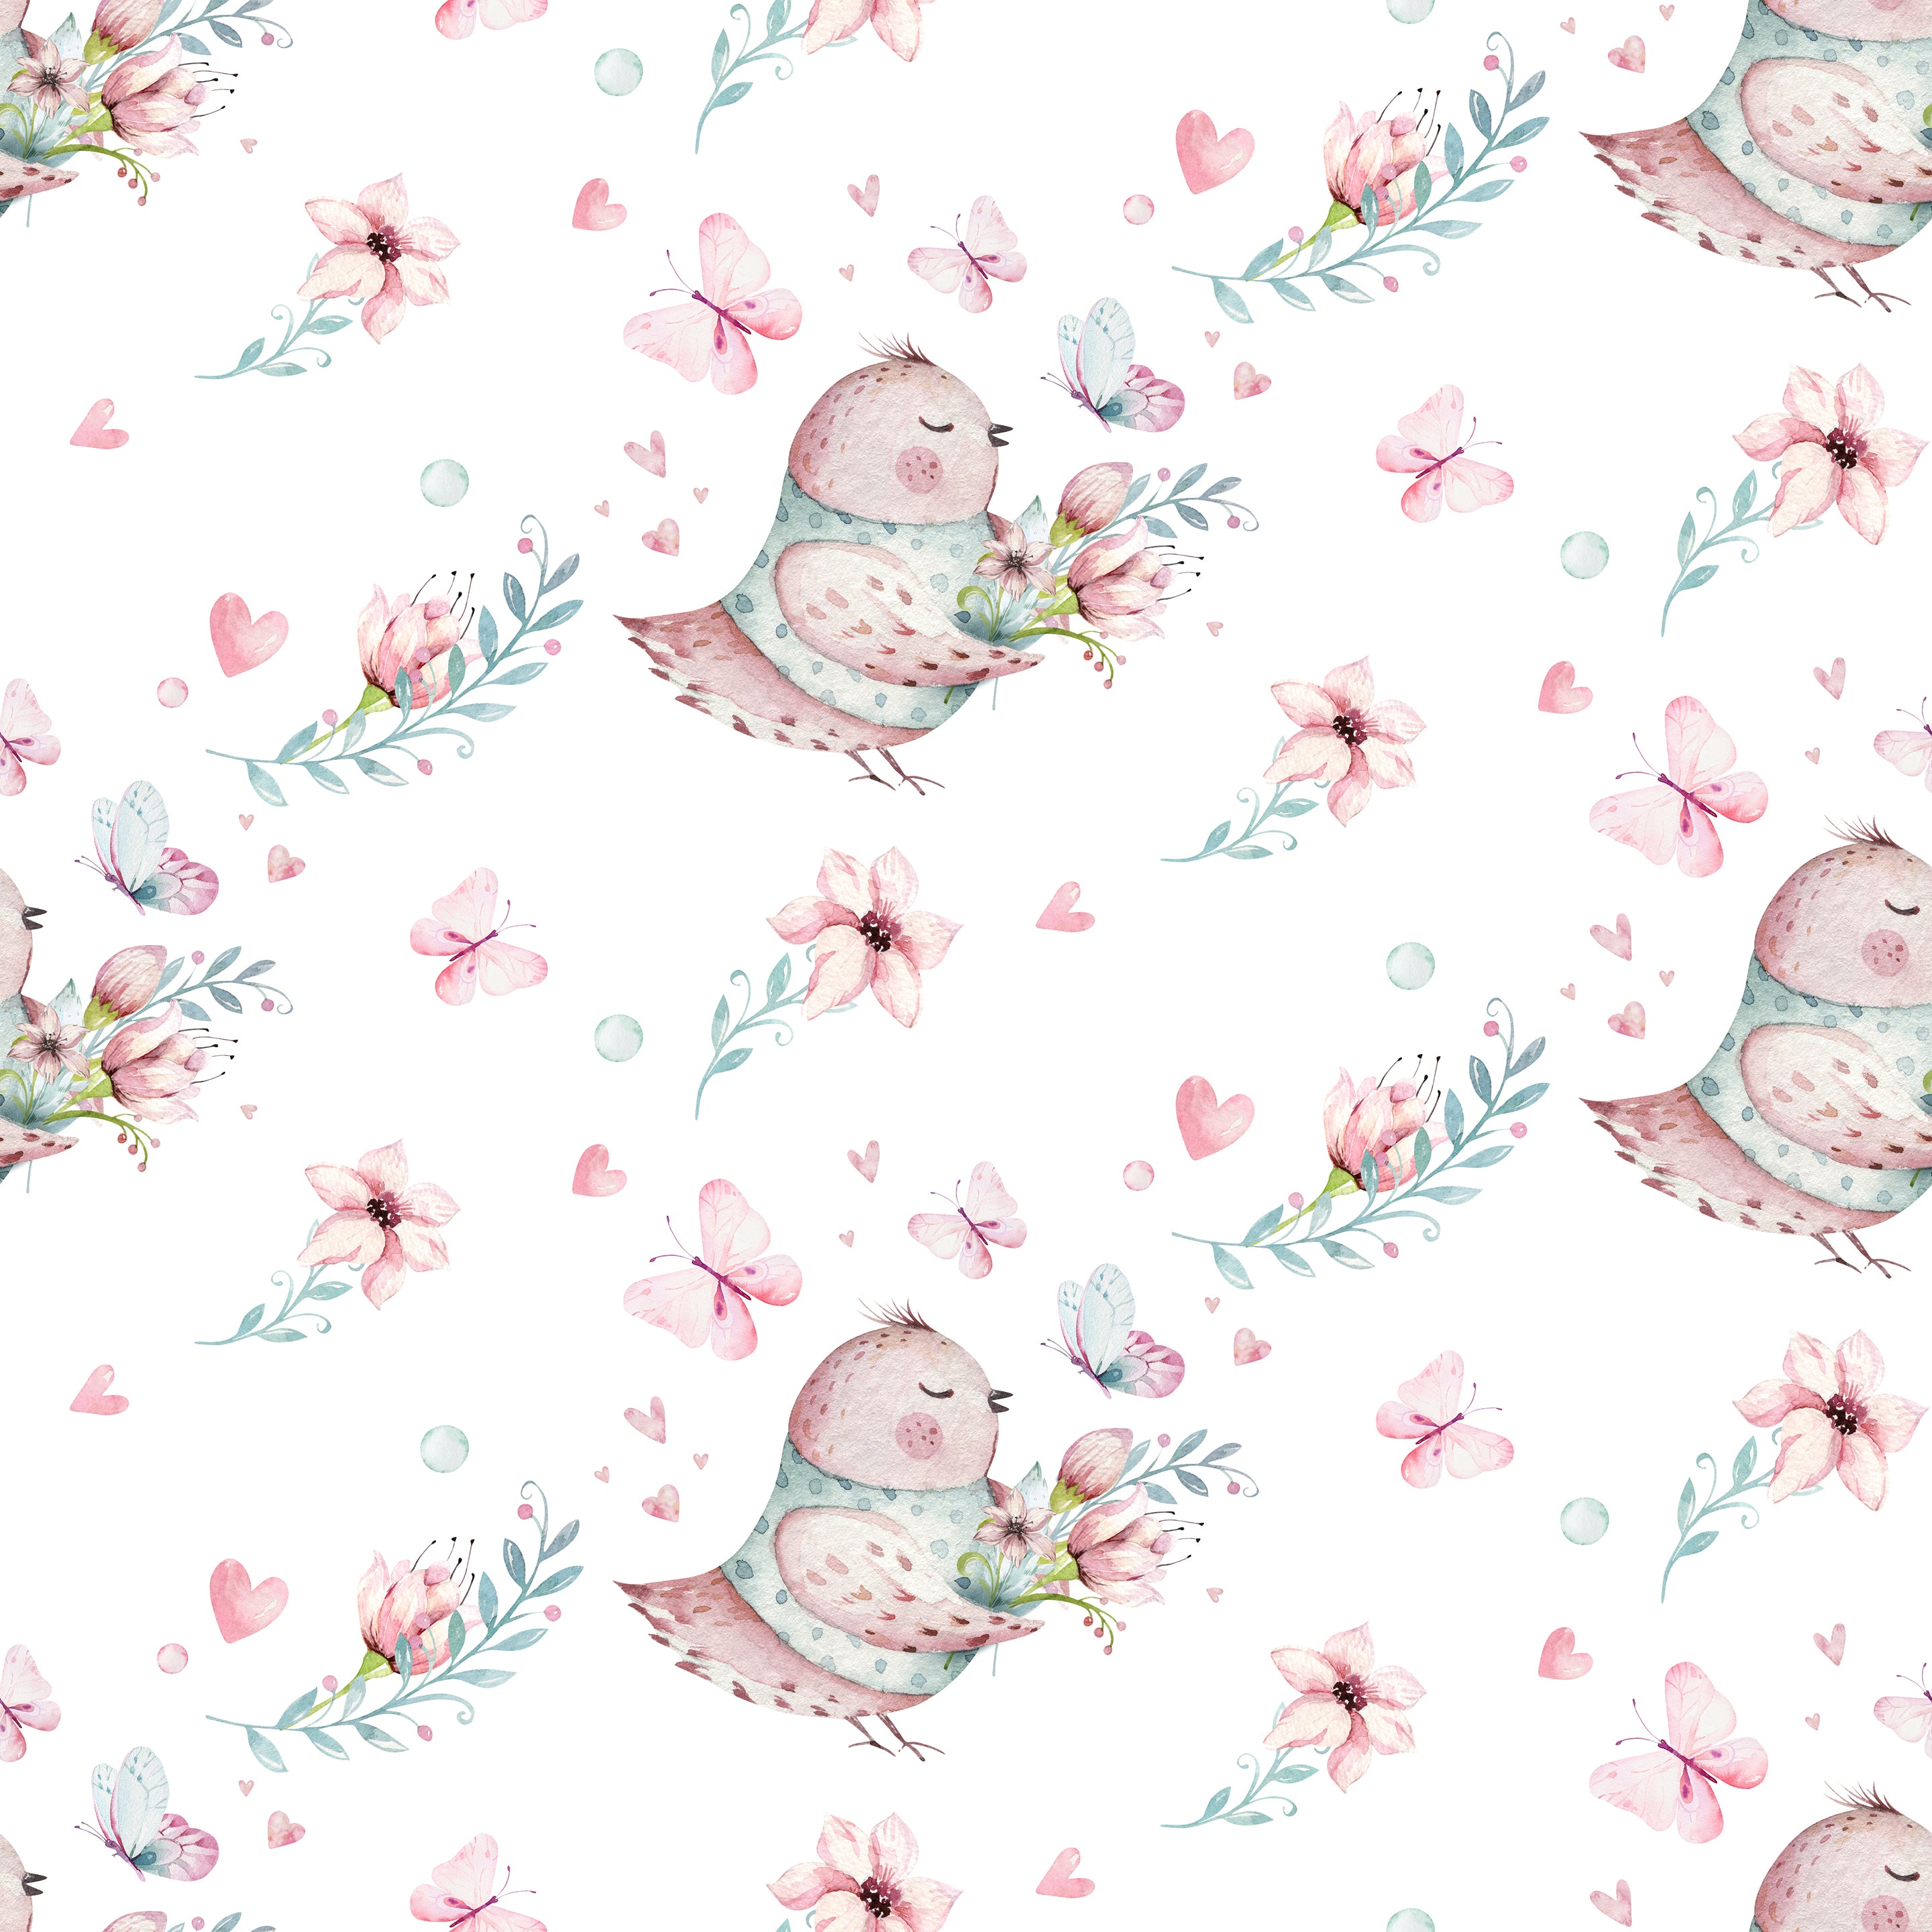 Close-up view of the 'Fairy and Flowers Wallpaper IV' showcasing a whimsical pattern with plump, cheerful birds adorned with leafy wings and surrounded by delicate flowers and fluttering butterflies. The color palette includes soft pinks, greens, and blues on a clean white background.